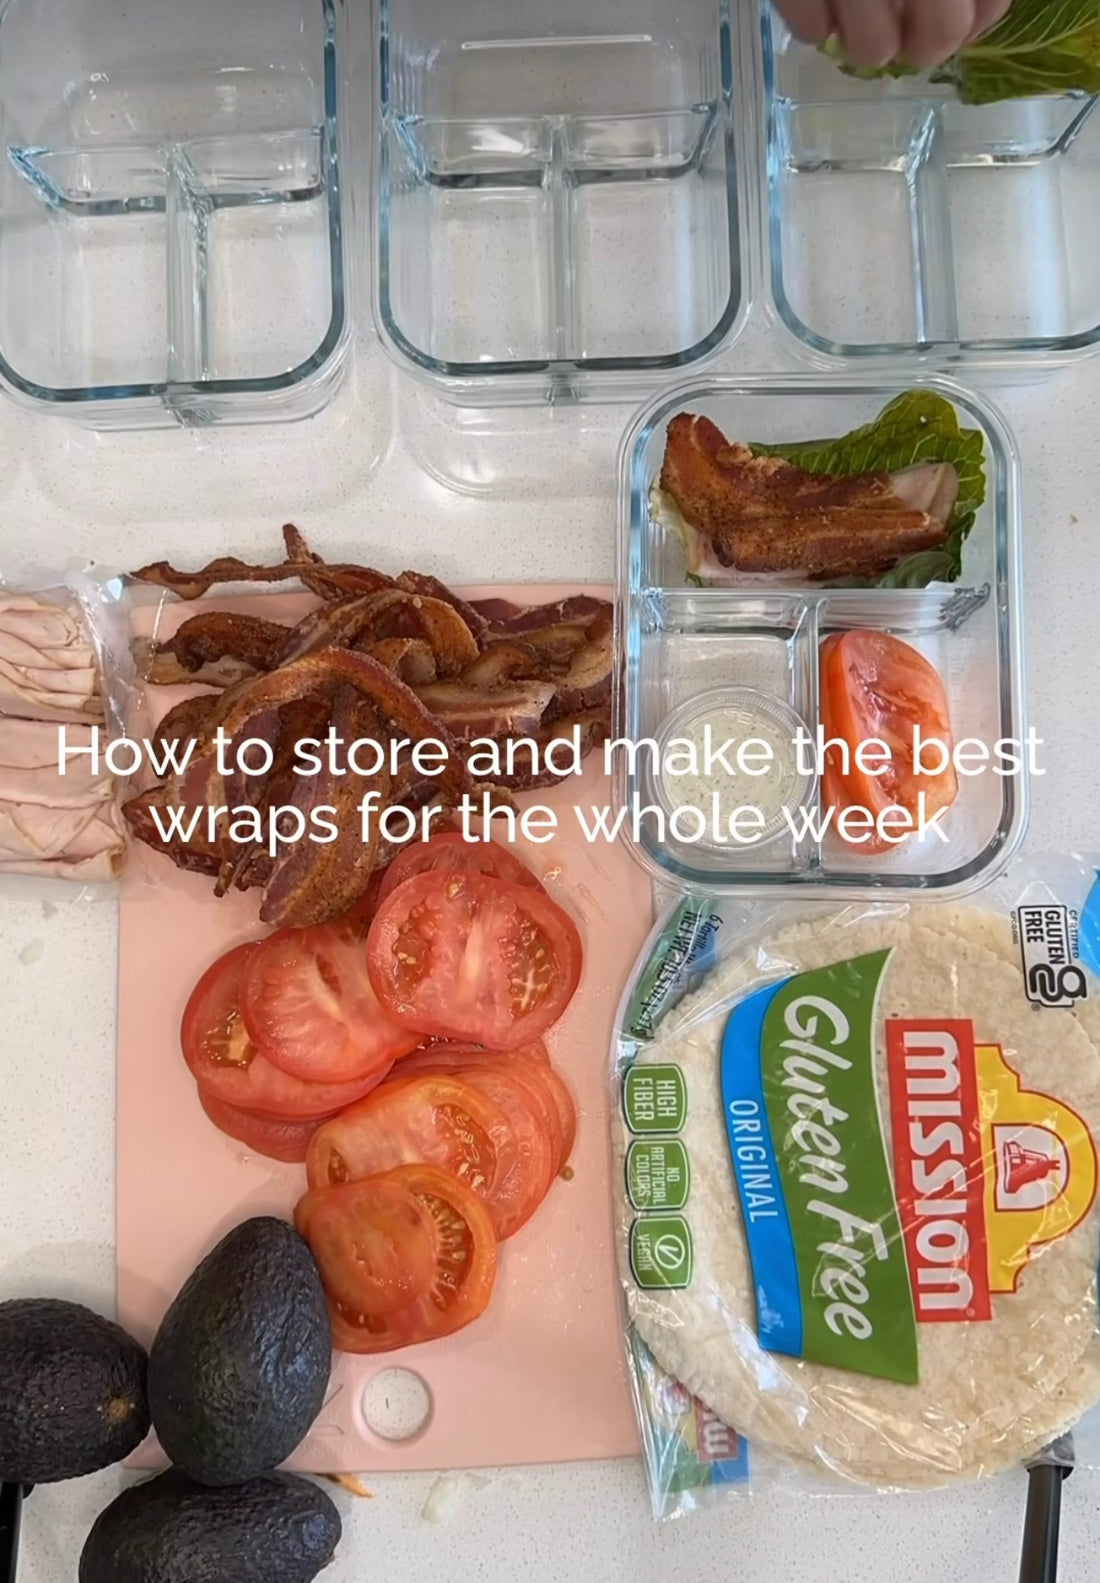 How to store and make the best wraps for the whole week